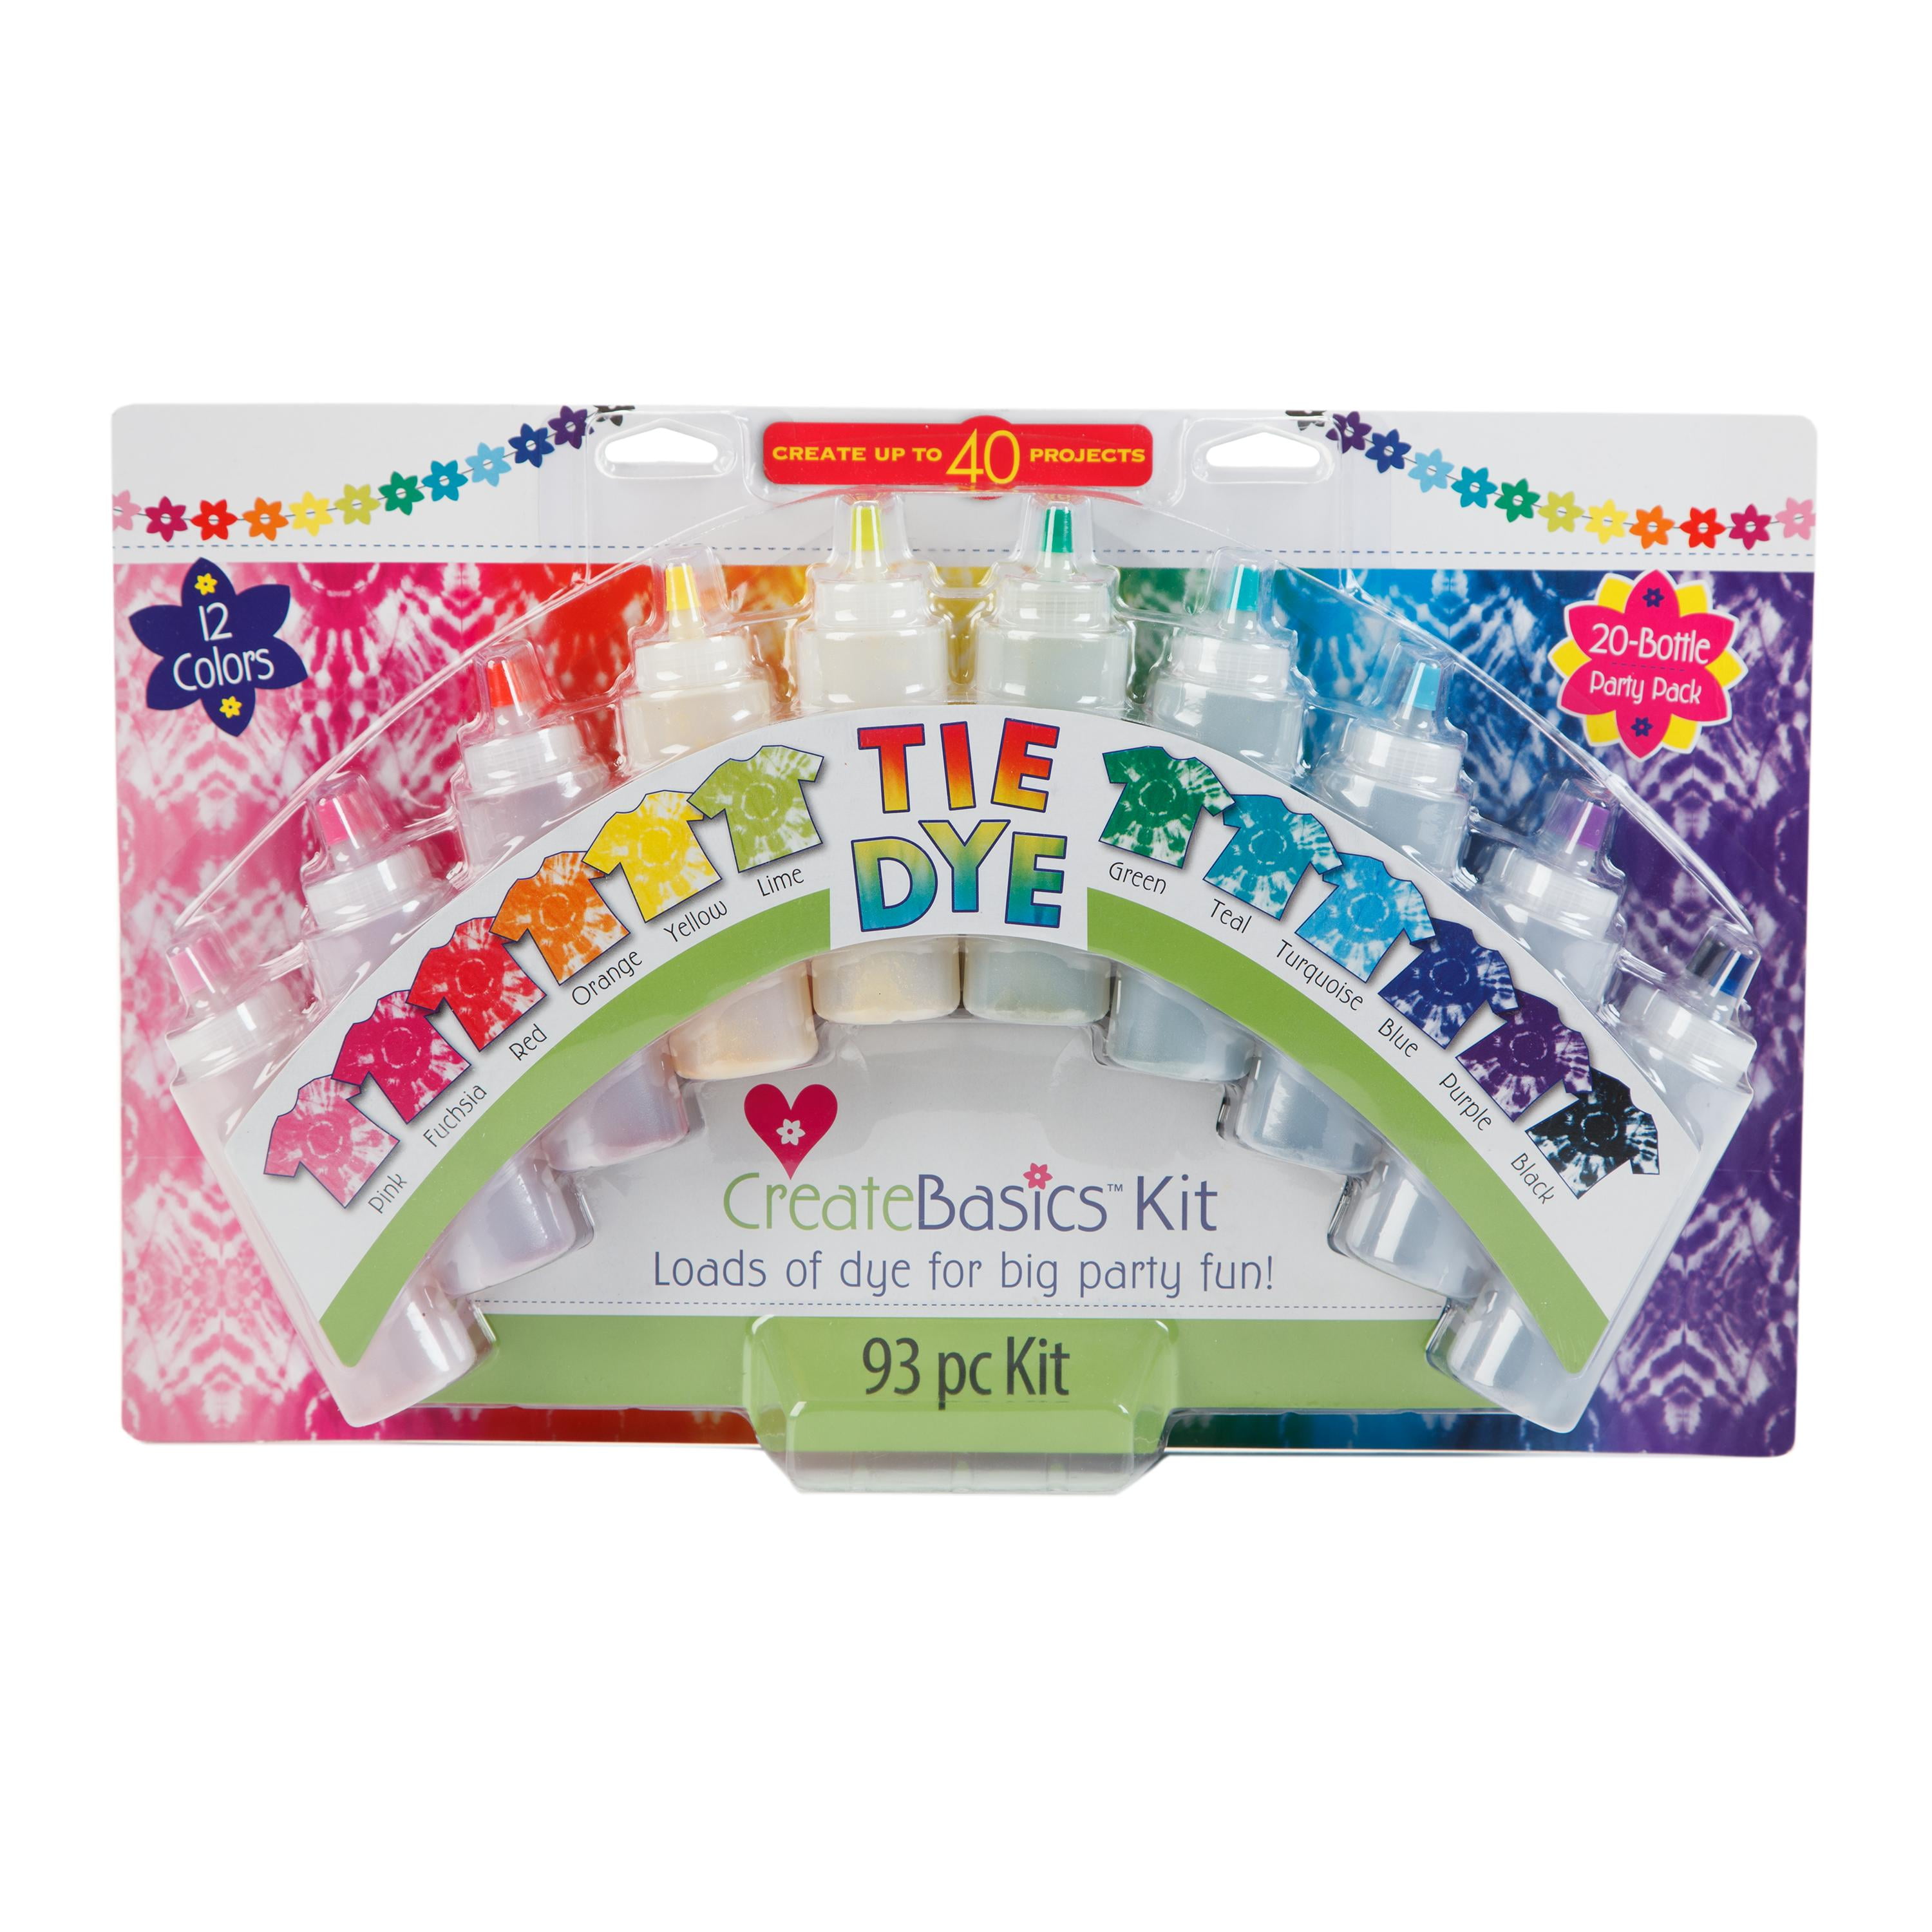 Craftbud Tie Dye Kit for Kids Adults Groups & Outdoor Activities Full Kit + Tote Bag | Large